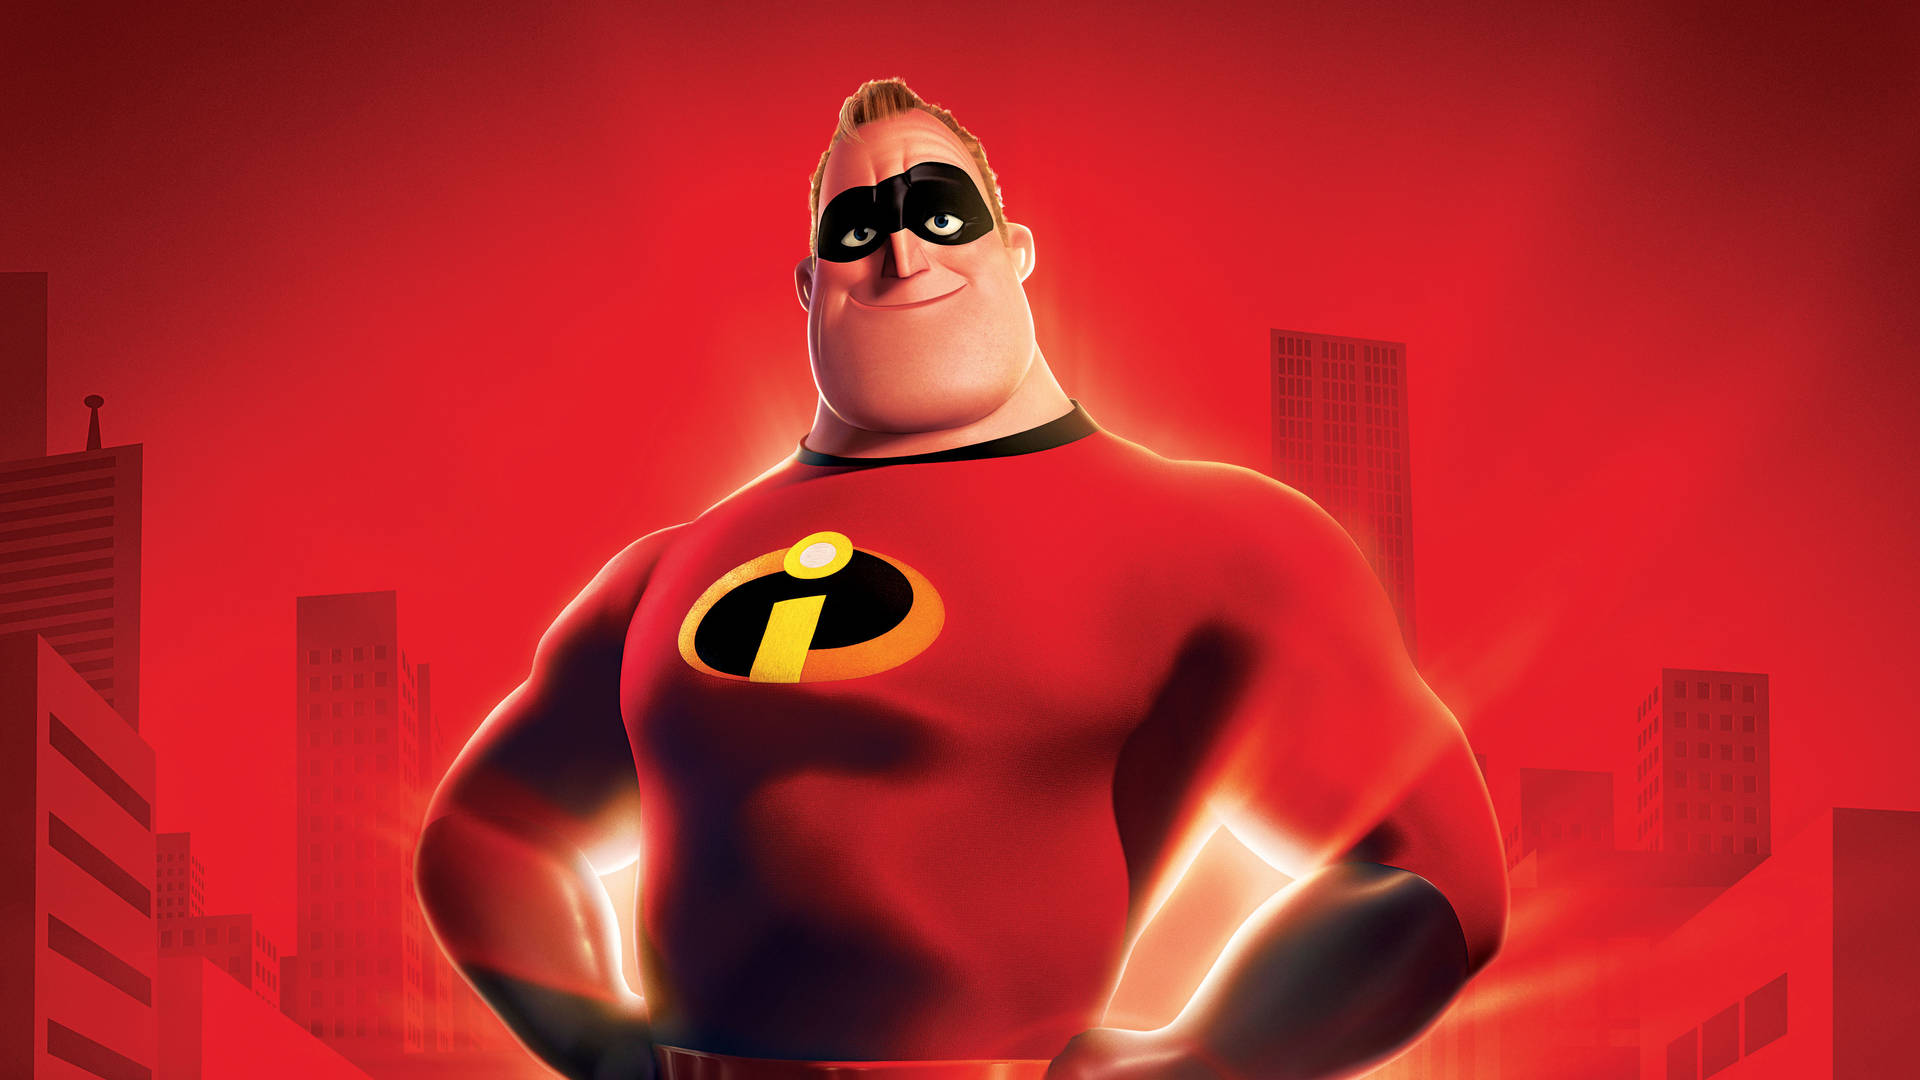 Official Mr. Incredible Poster Background